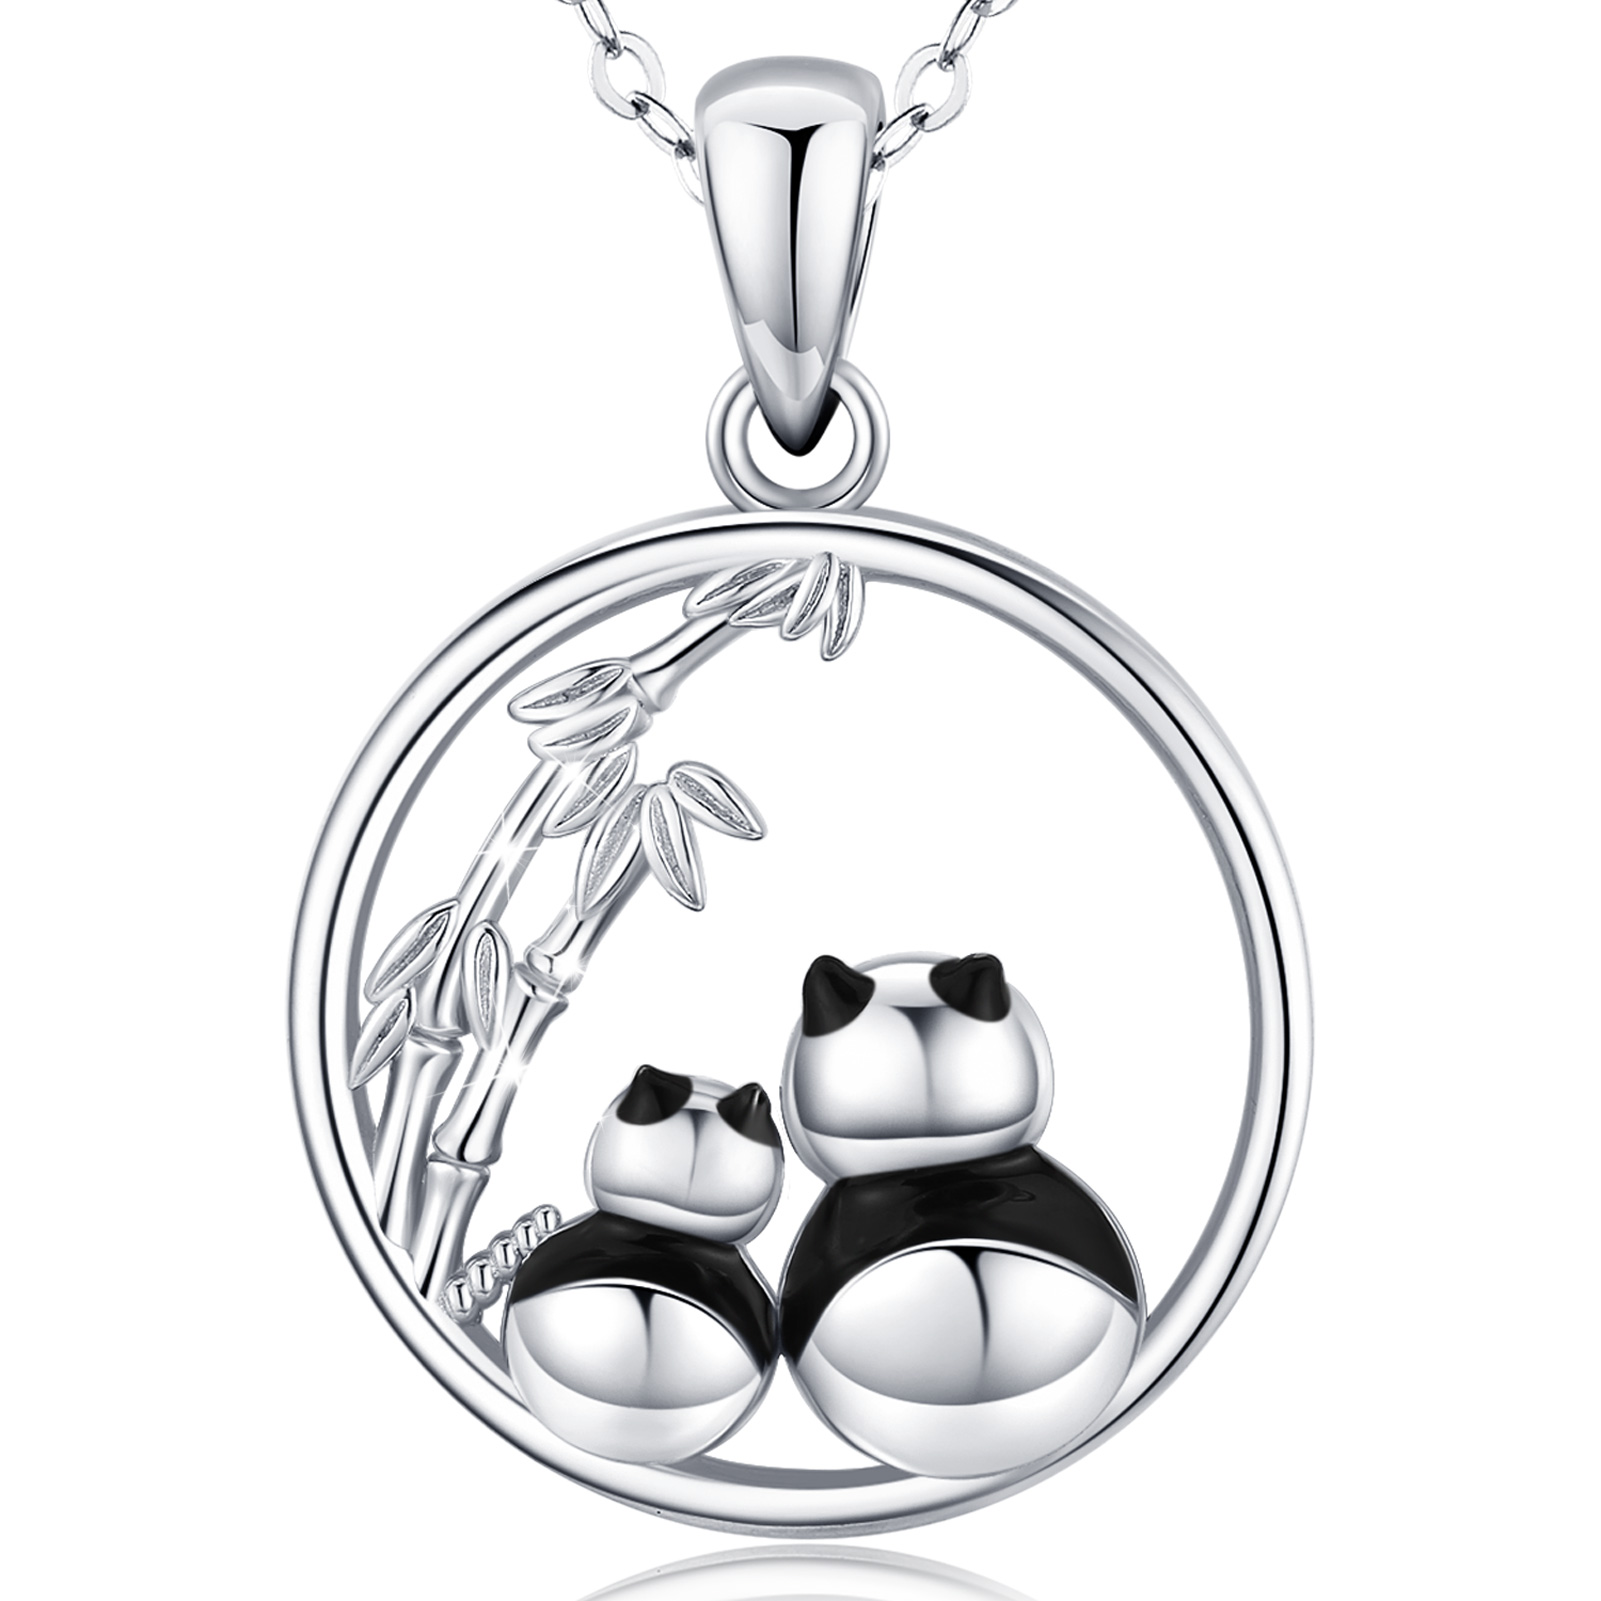 Merryshine Jewelry Wholesale Latest Product 2021 Mothers Day Gift S925 Silver Panda Necklace Pendant